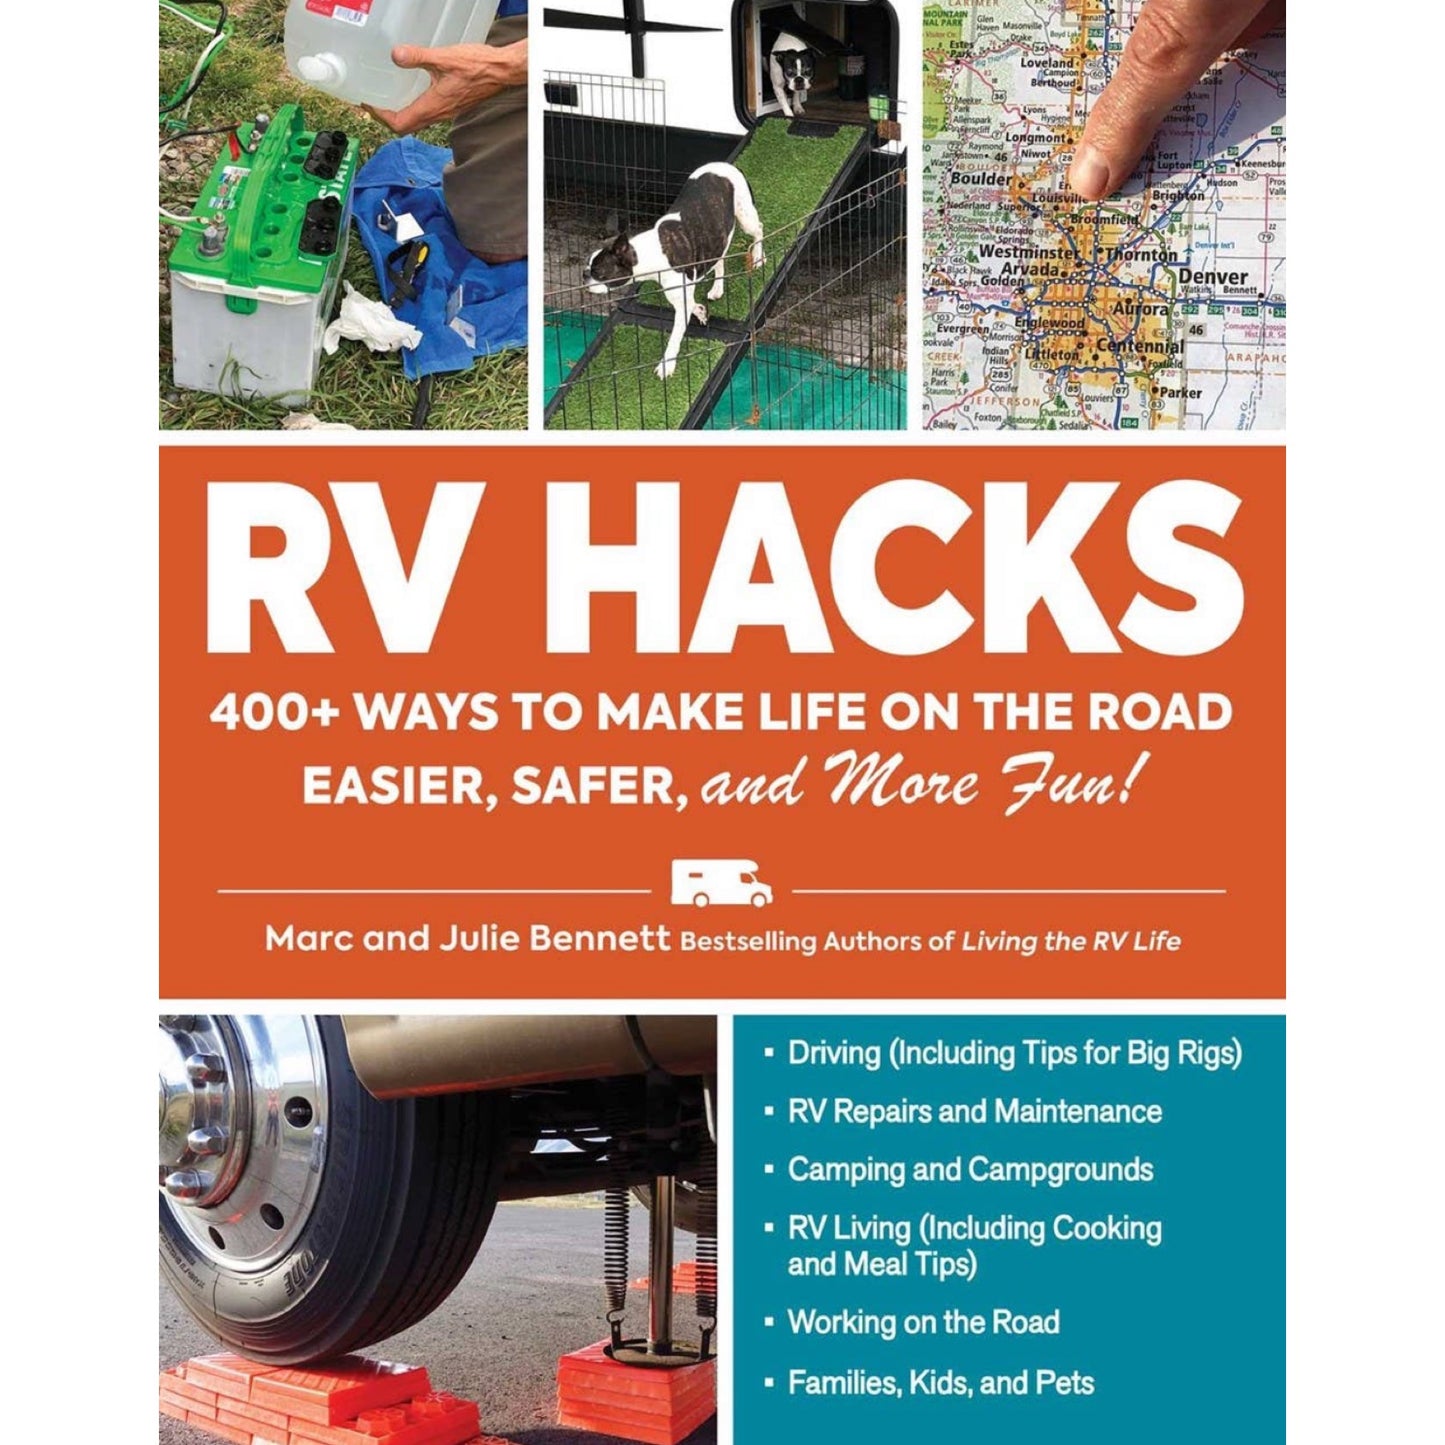 RV Hacks: 400+ Ways to Make Life on the Road Easier